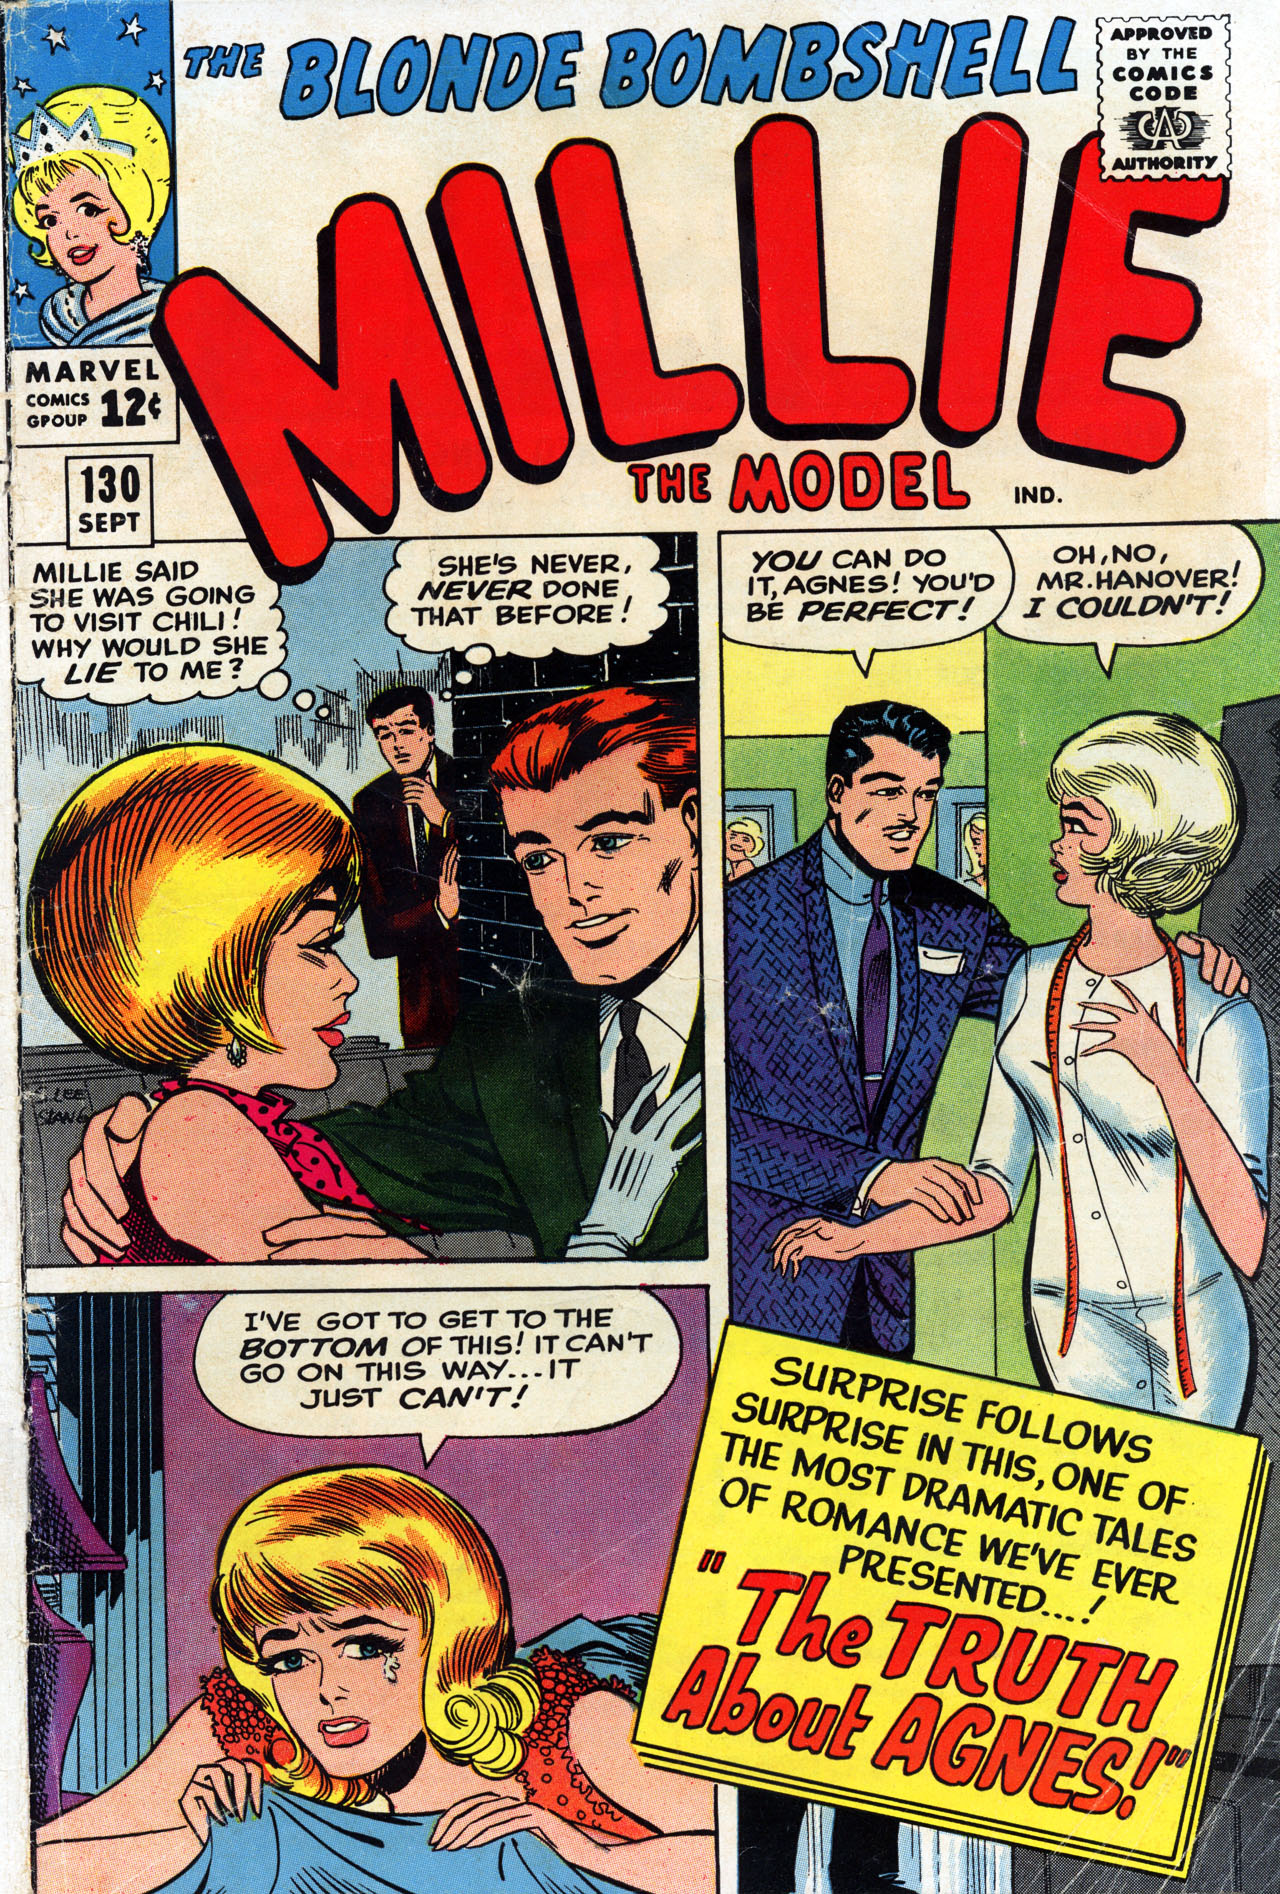 Read online Millie the Model comic -  Issue #130 - 1